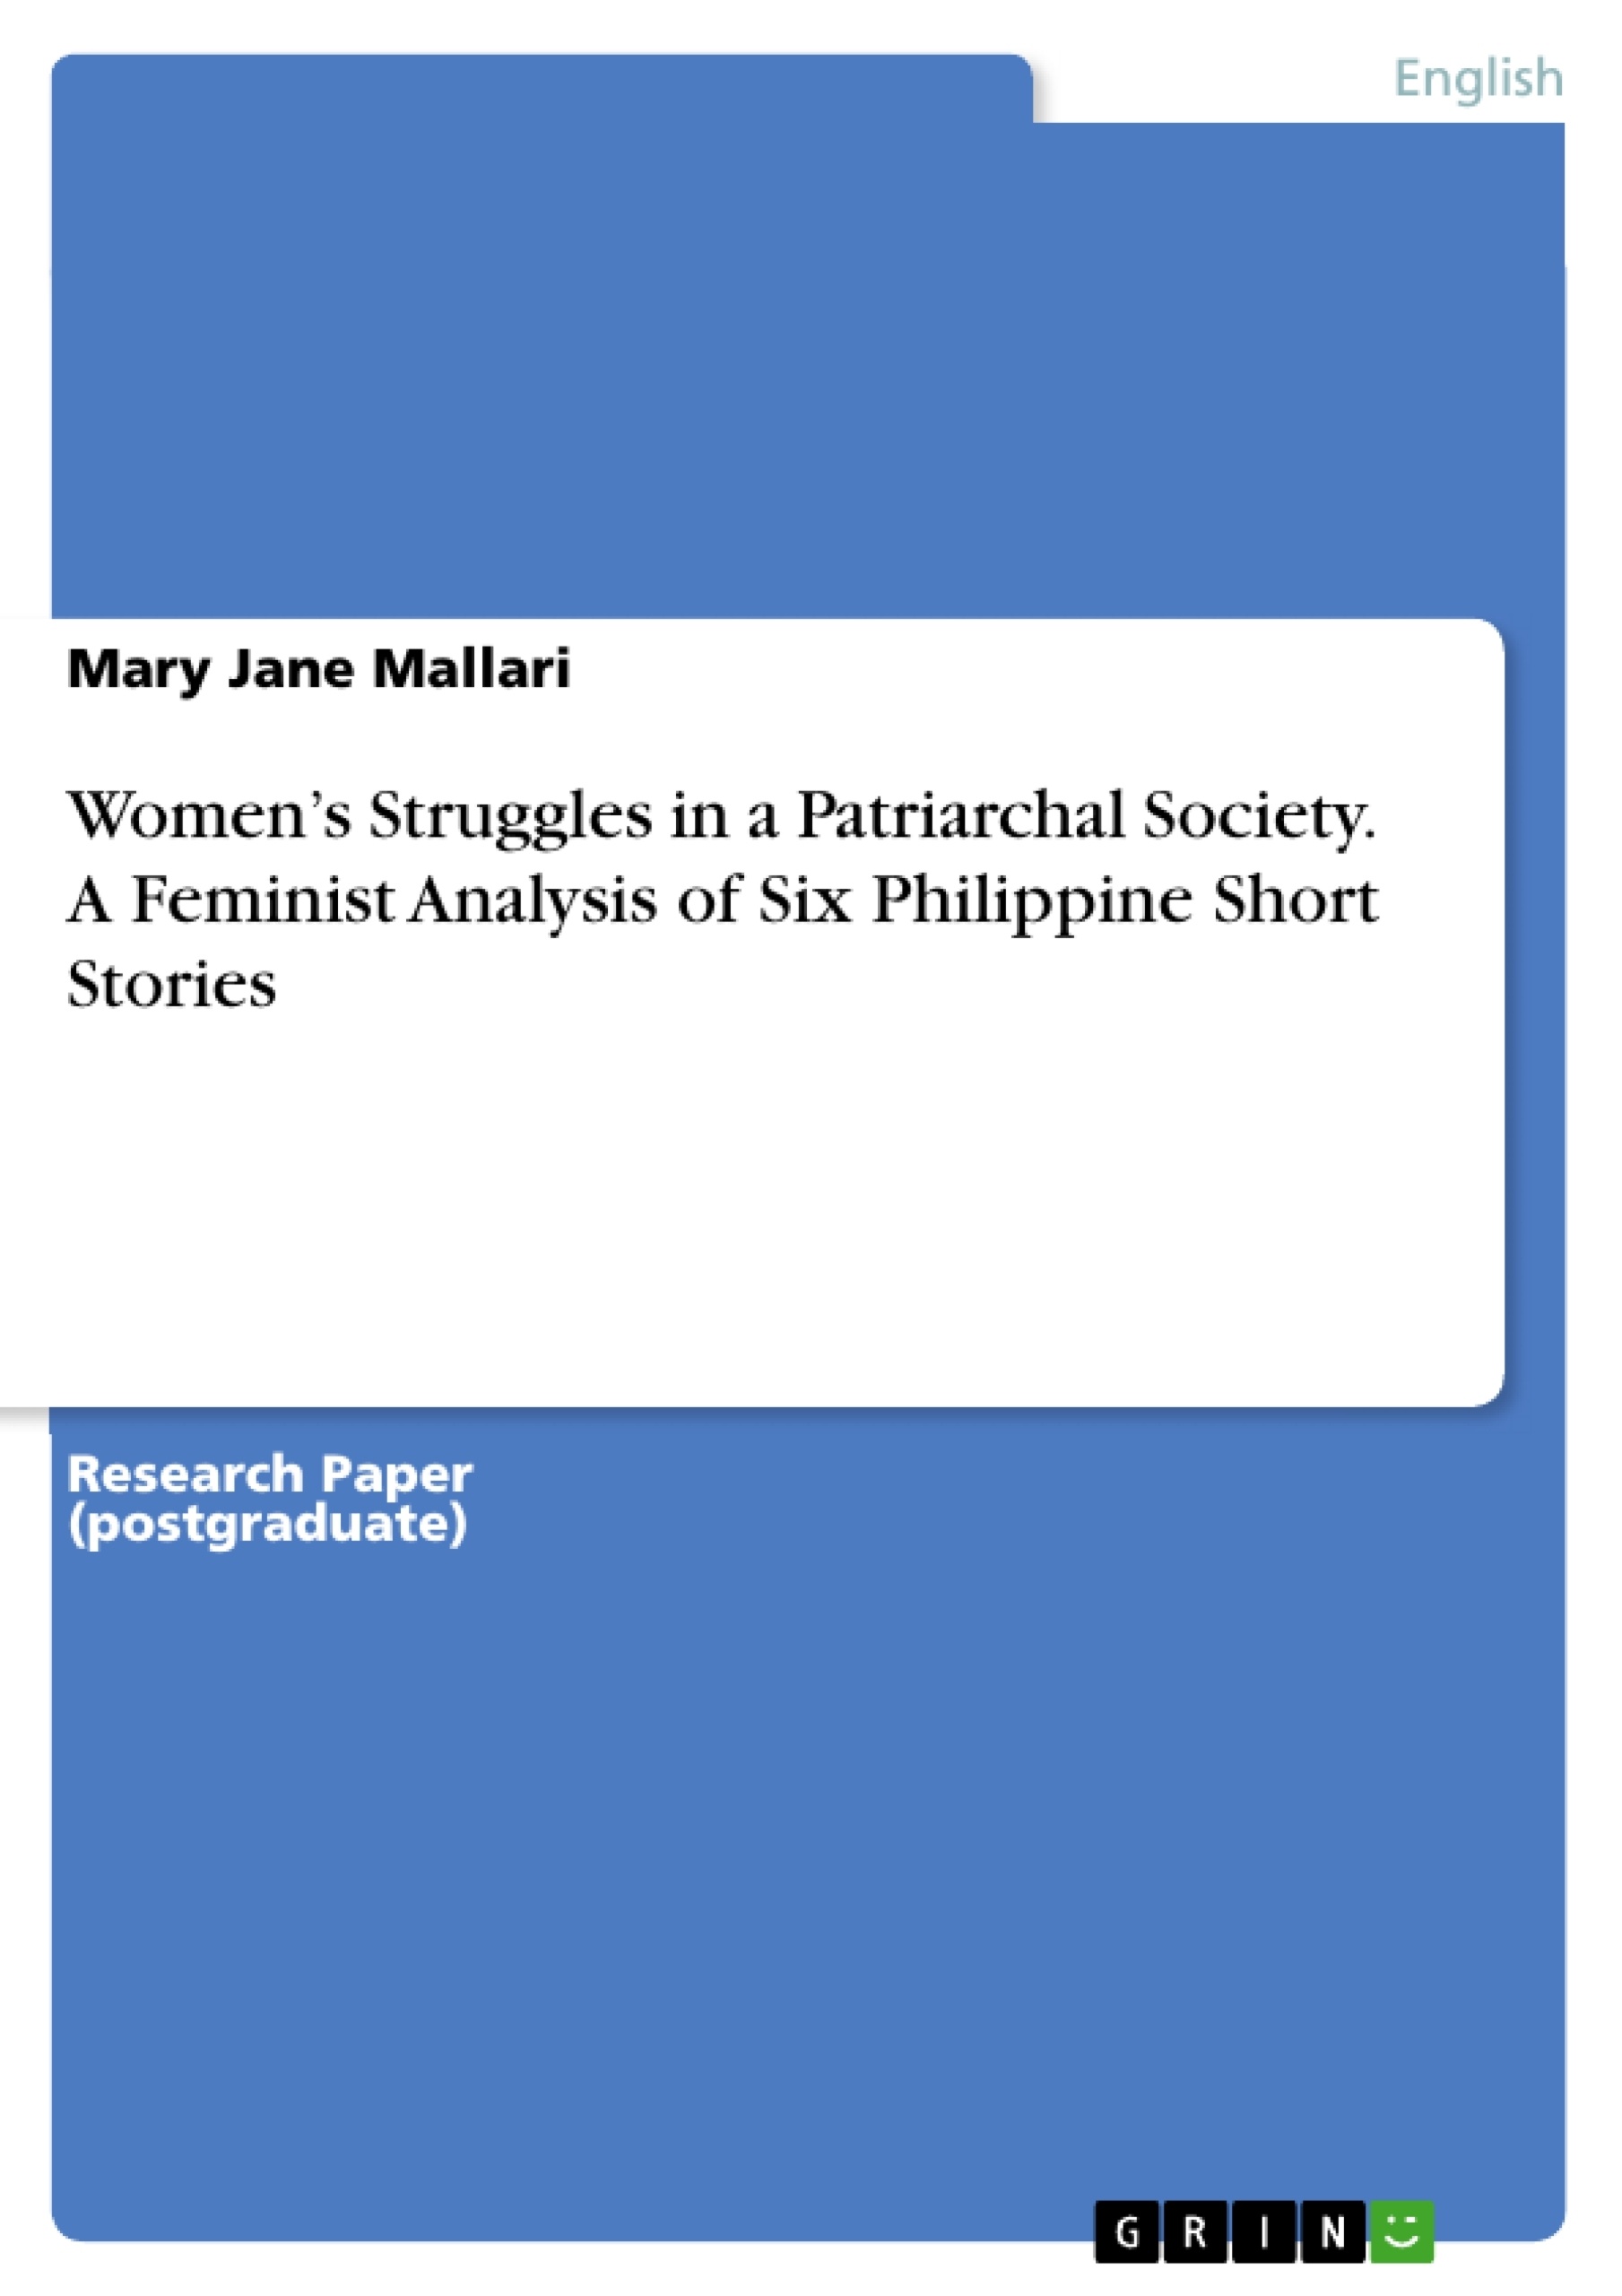 Título: Women’s Struggles in a Patriarchal Society. A Feminist Analysis of Six Philippine Short Stories